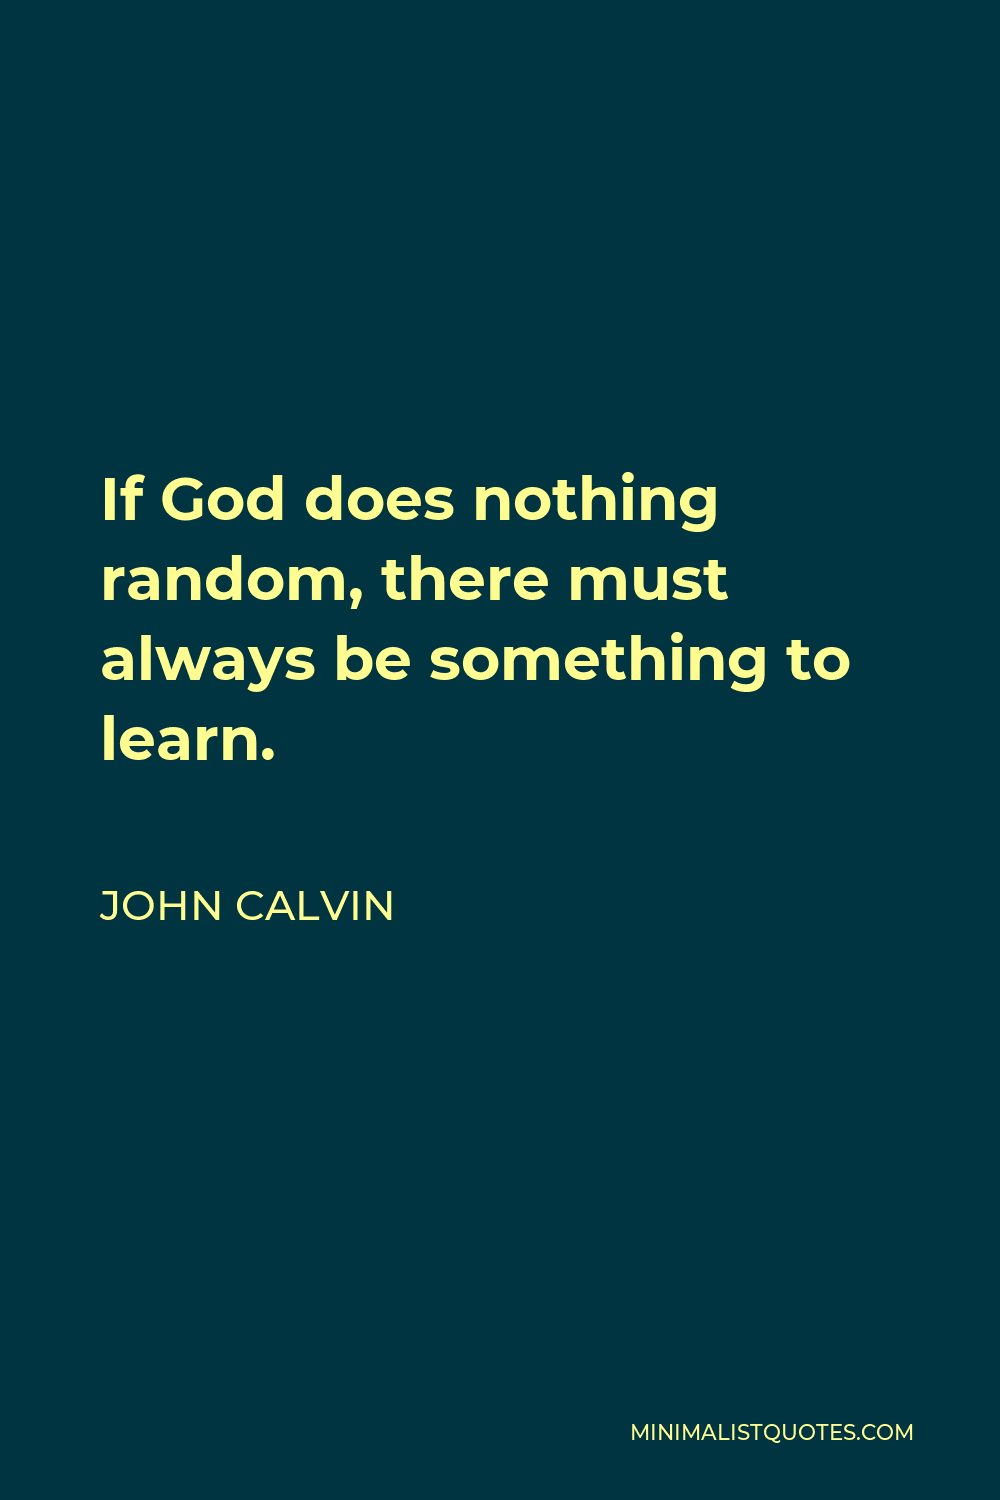 John Calvin Quote - If God does nothing random, there must always be something to learn.